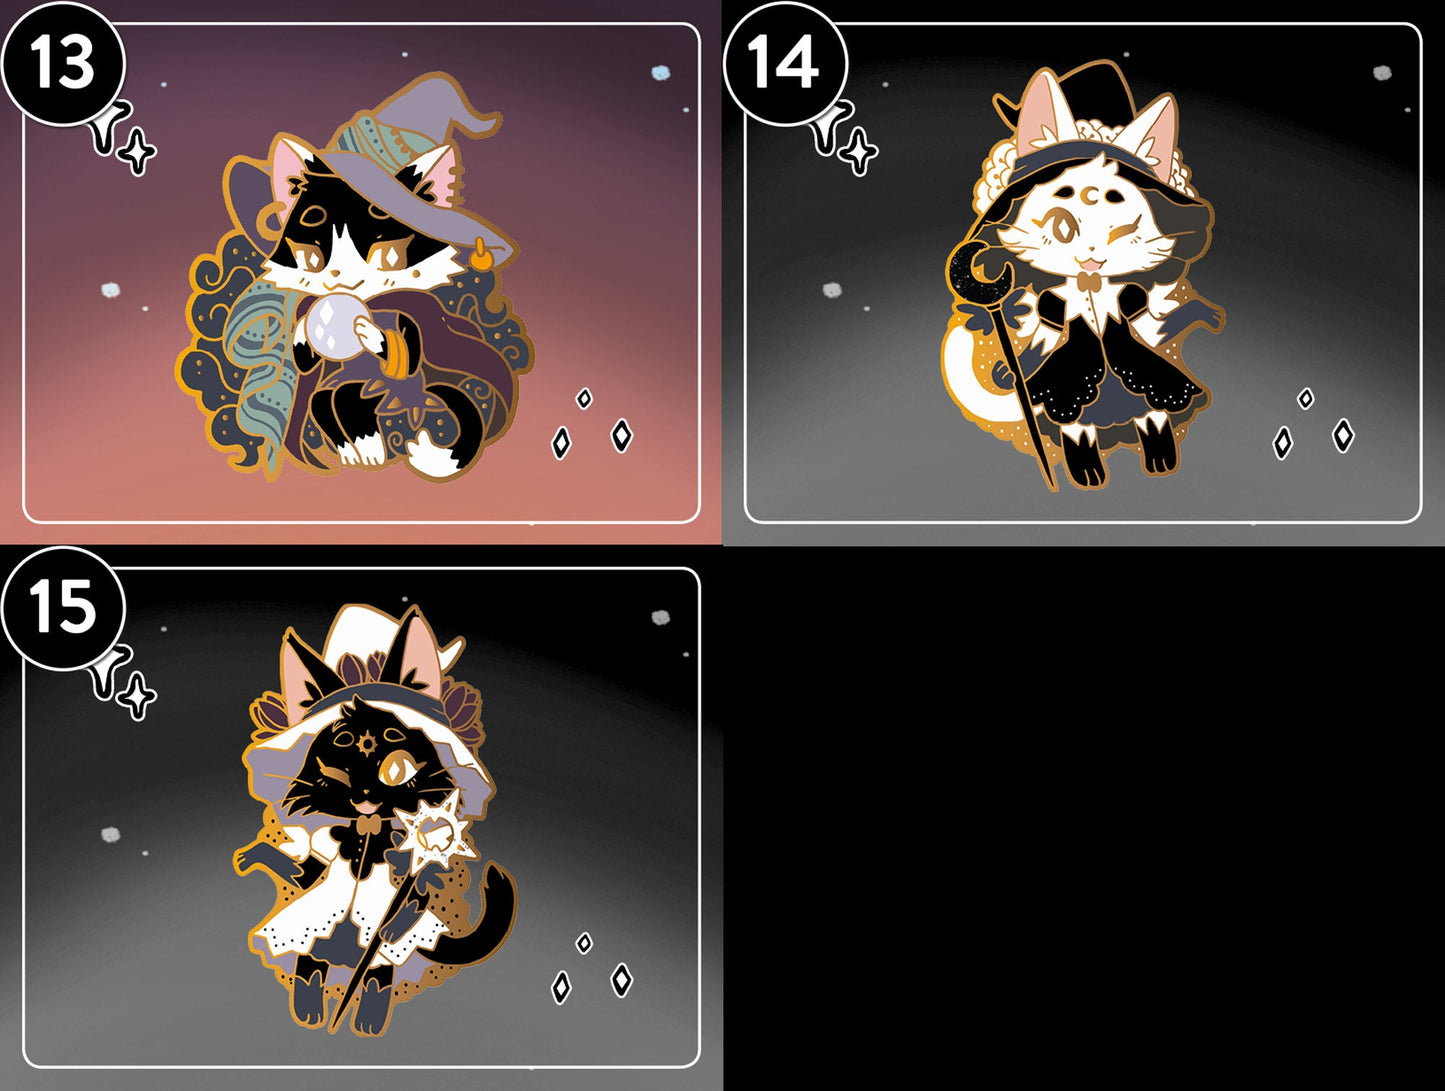 Myuna's Little Witch Acatemia Cat Witch Pins - Pick & Mix cute Cat Witch talismans pin bundles, Kawaii Witchy Occult Hard Enamel Pins